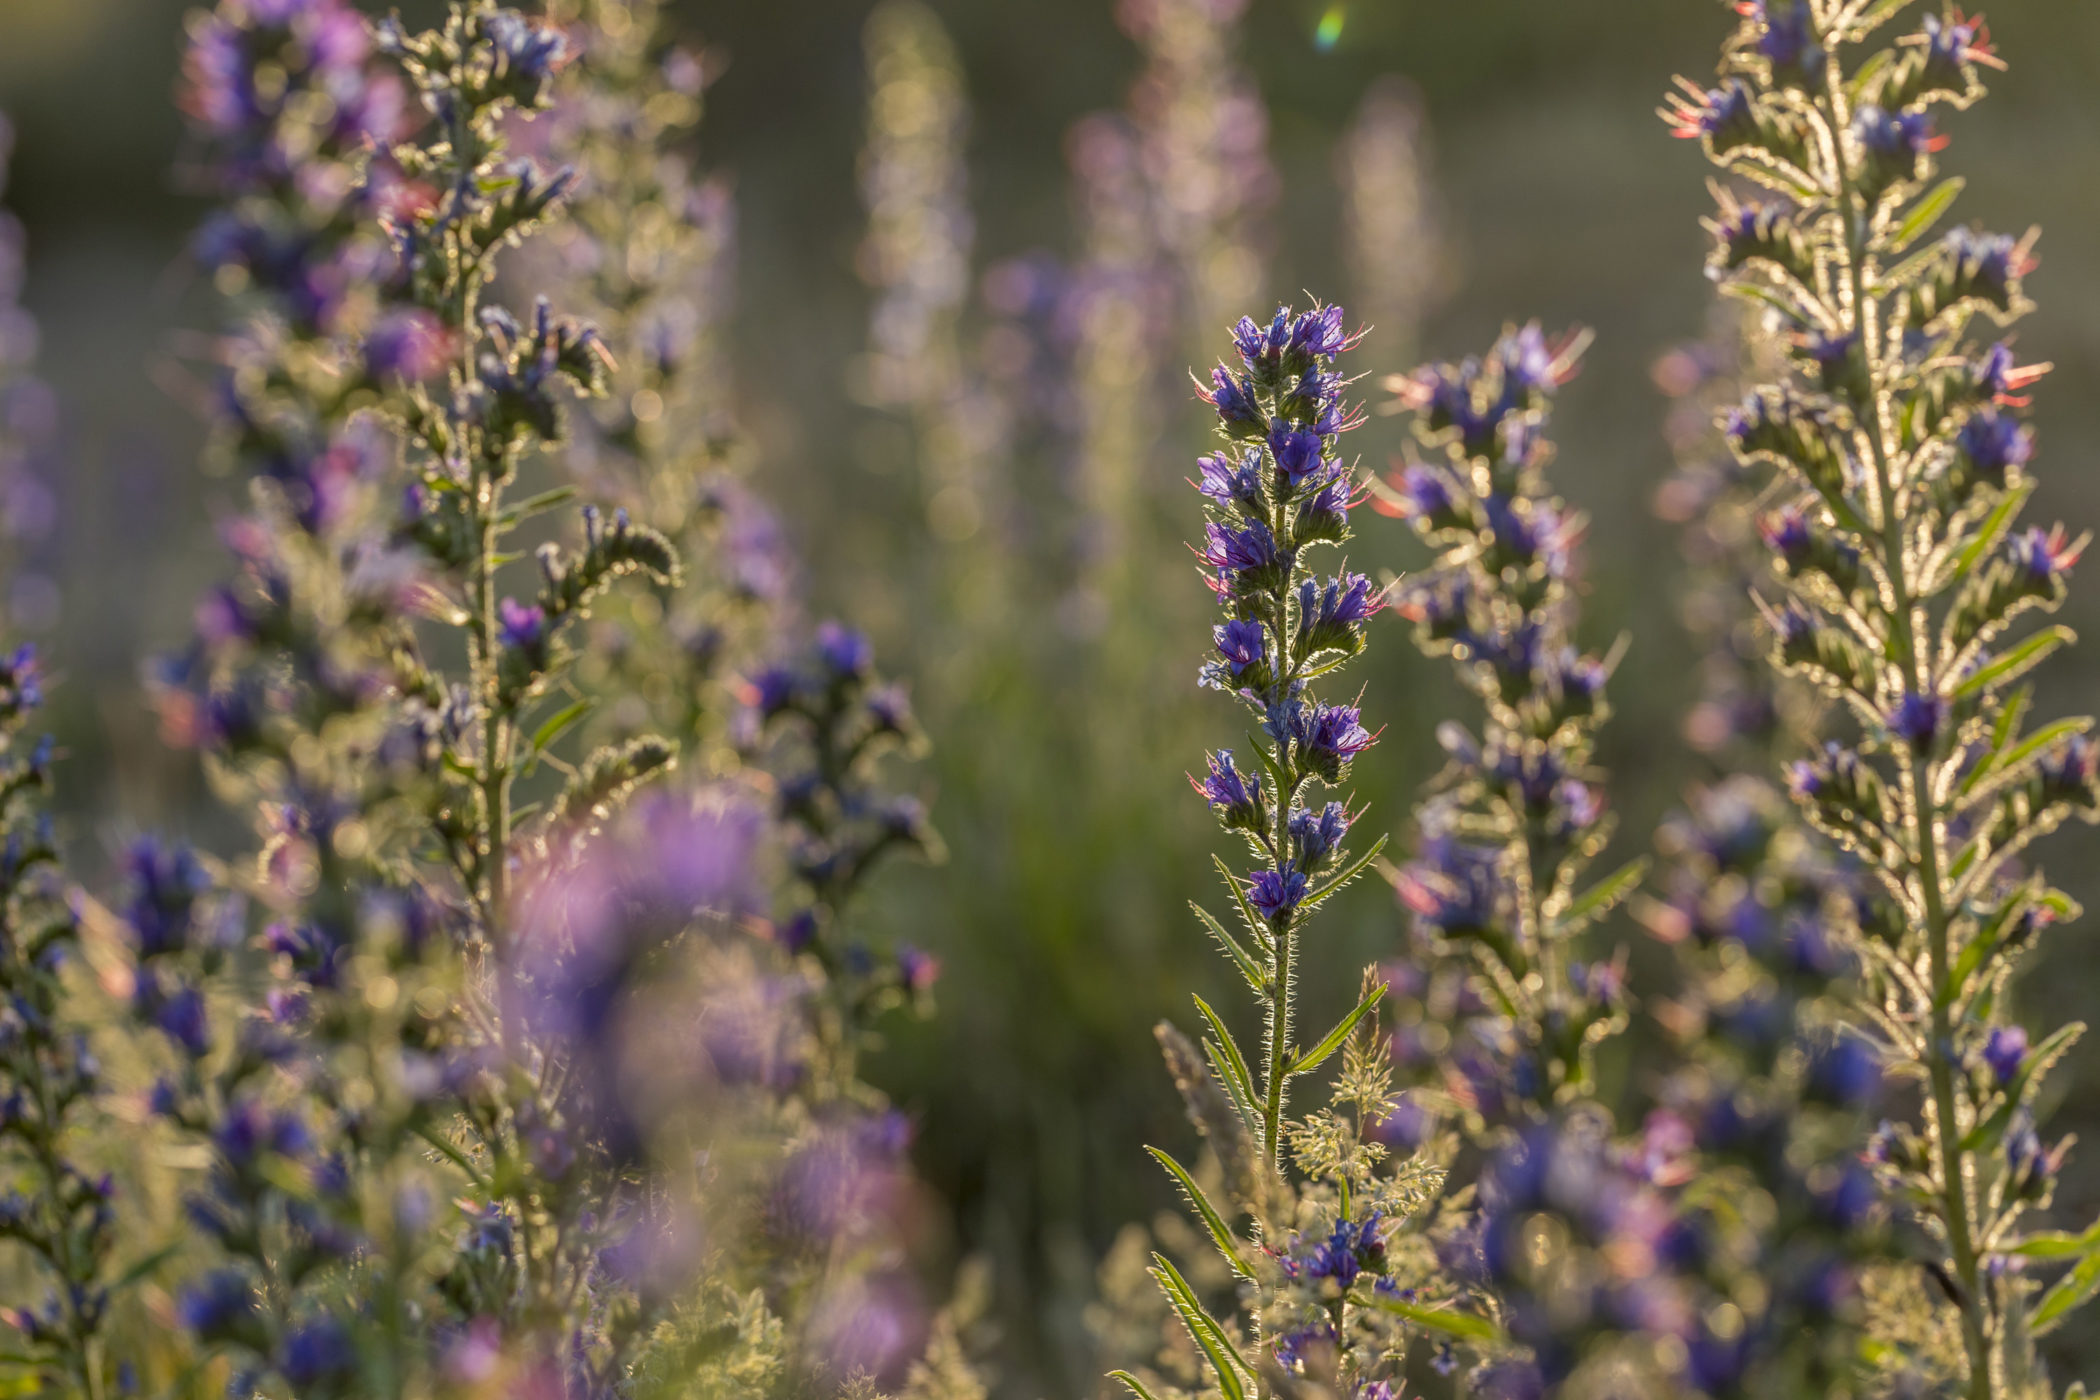 Viper’s bugloss is a stately flower with beautiful flowers and stems. Credit: David Chapman